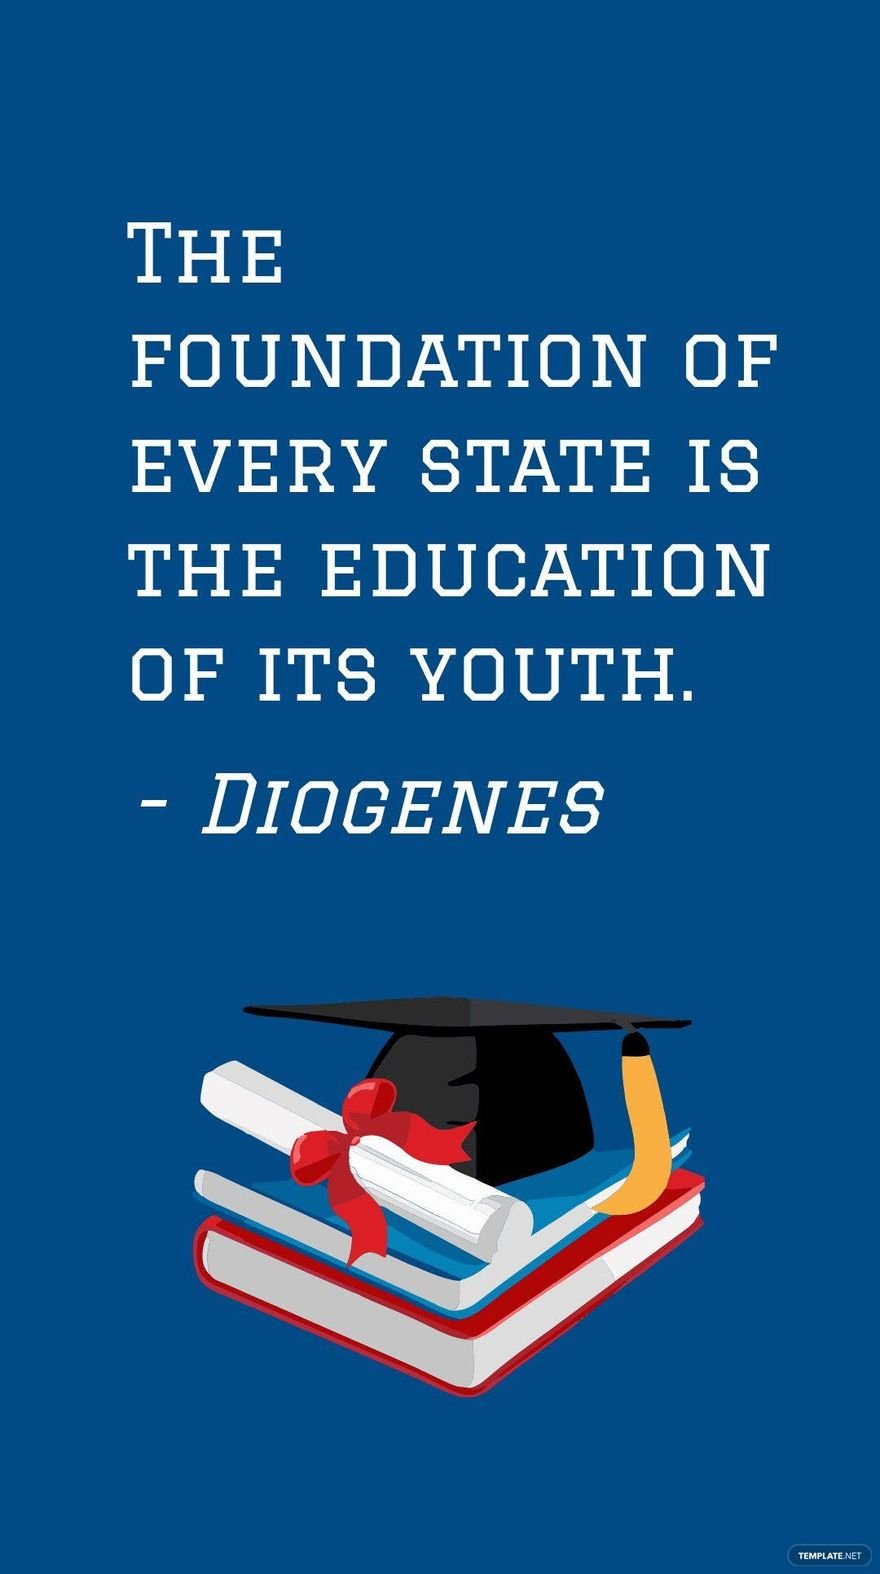 Diogenes - The foundation of every state is the education of its youth. in JPG